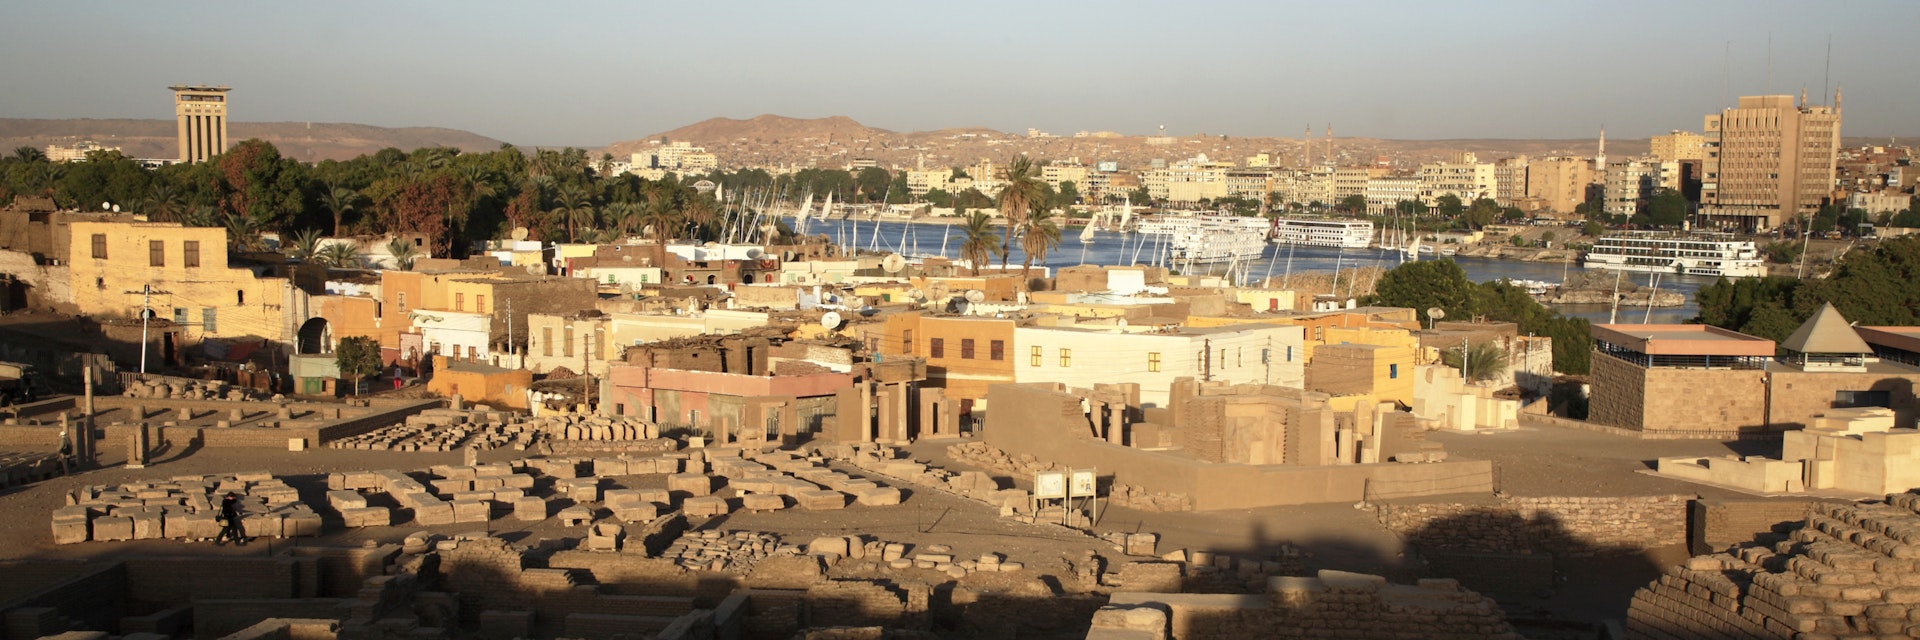 Ruins of Abu on Elephantine Island with Nile River in the background.